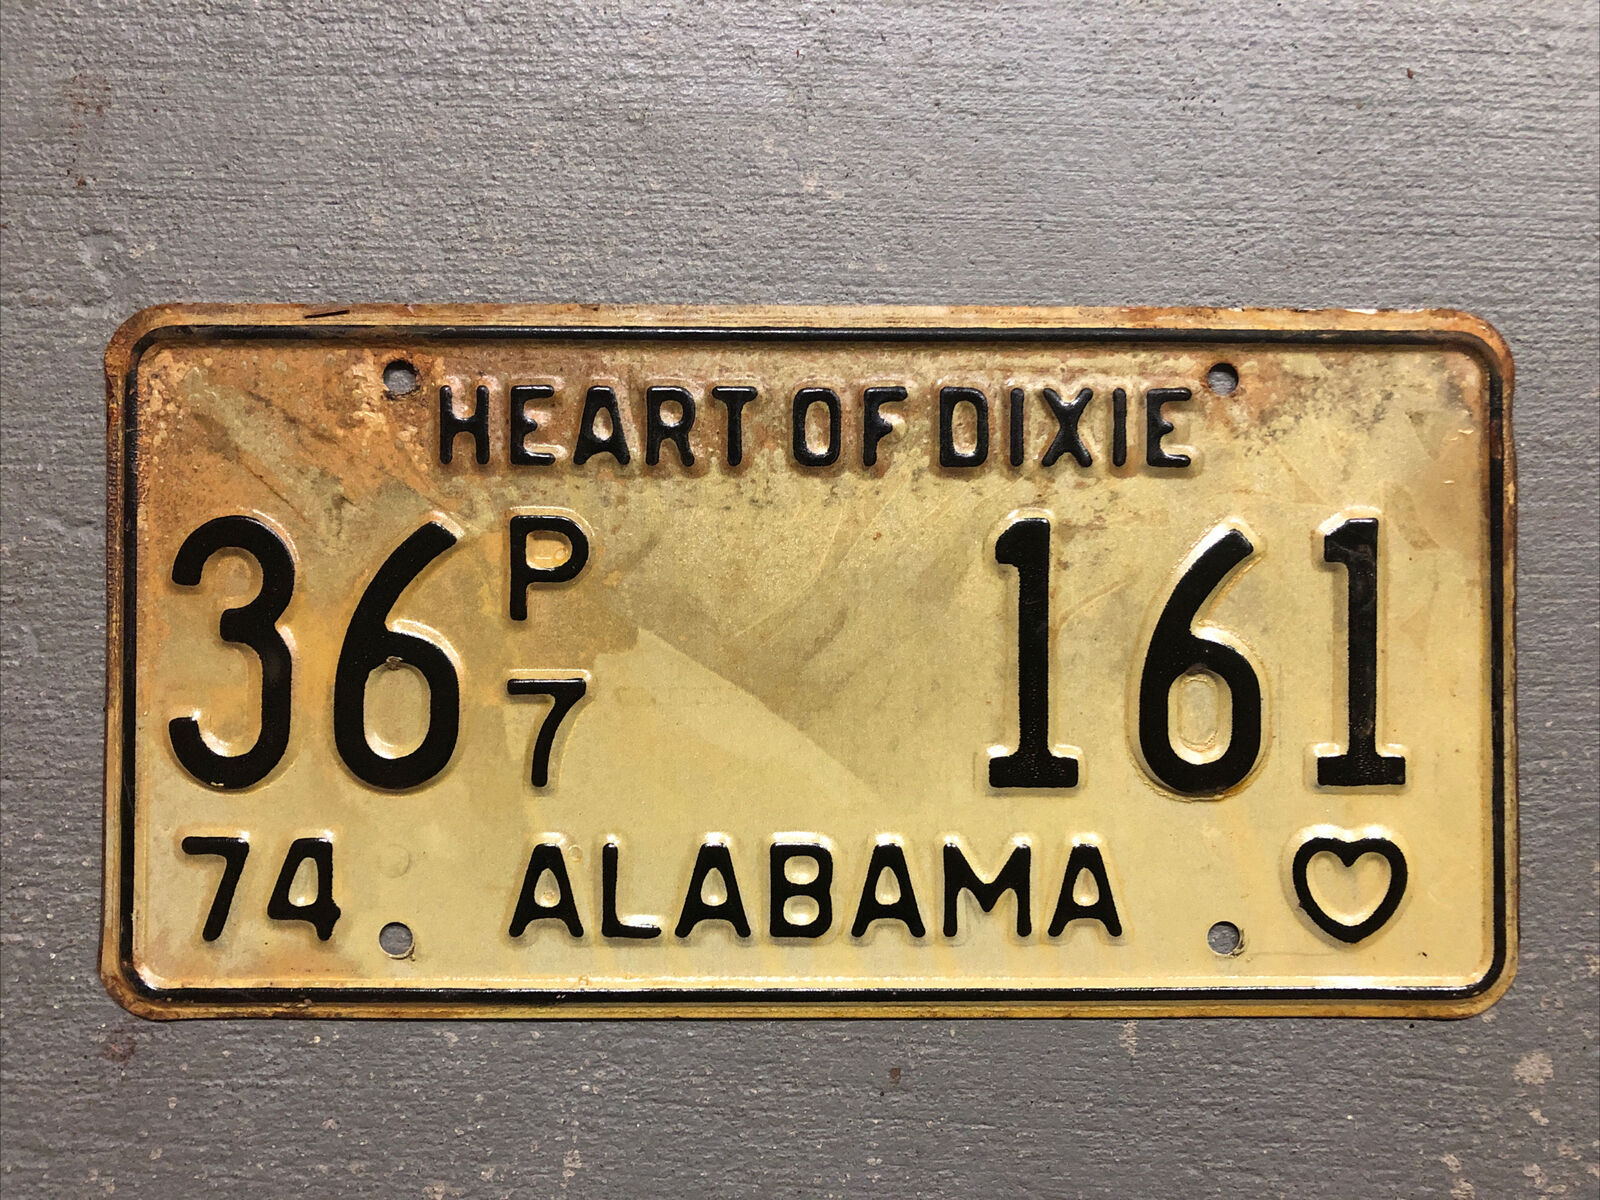 Vintage 1974 Alabama License Plate Heart Of Dixie White/black 36p7-161  Cool!!😎